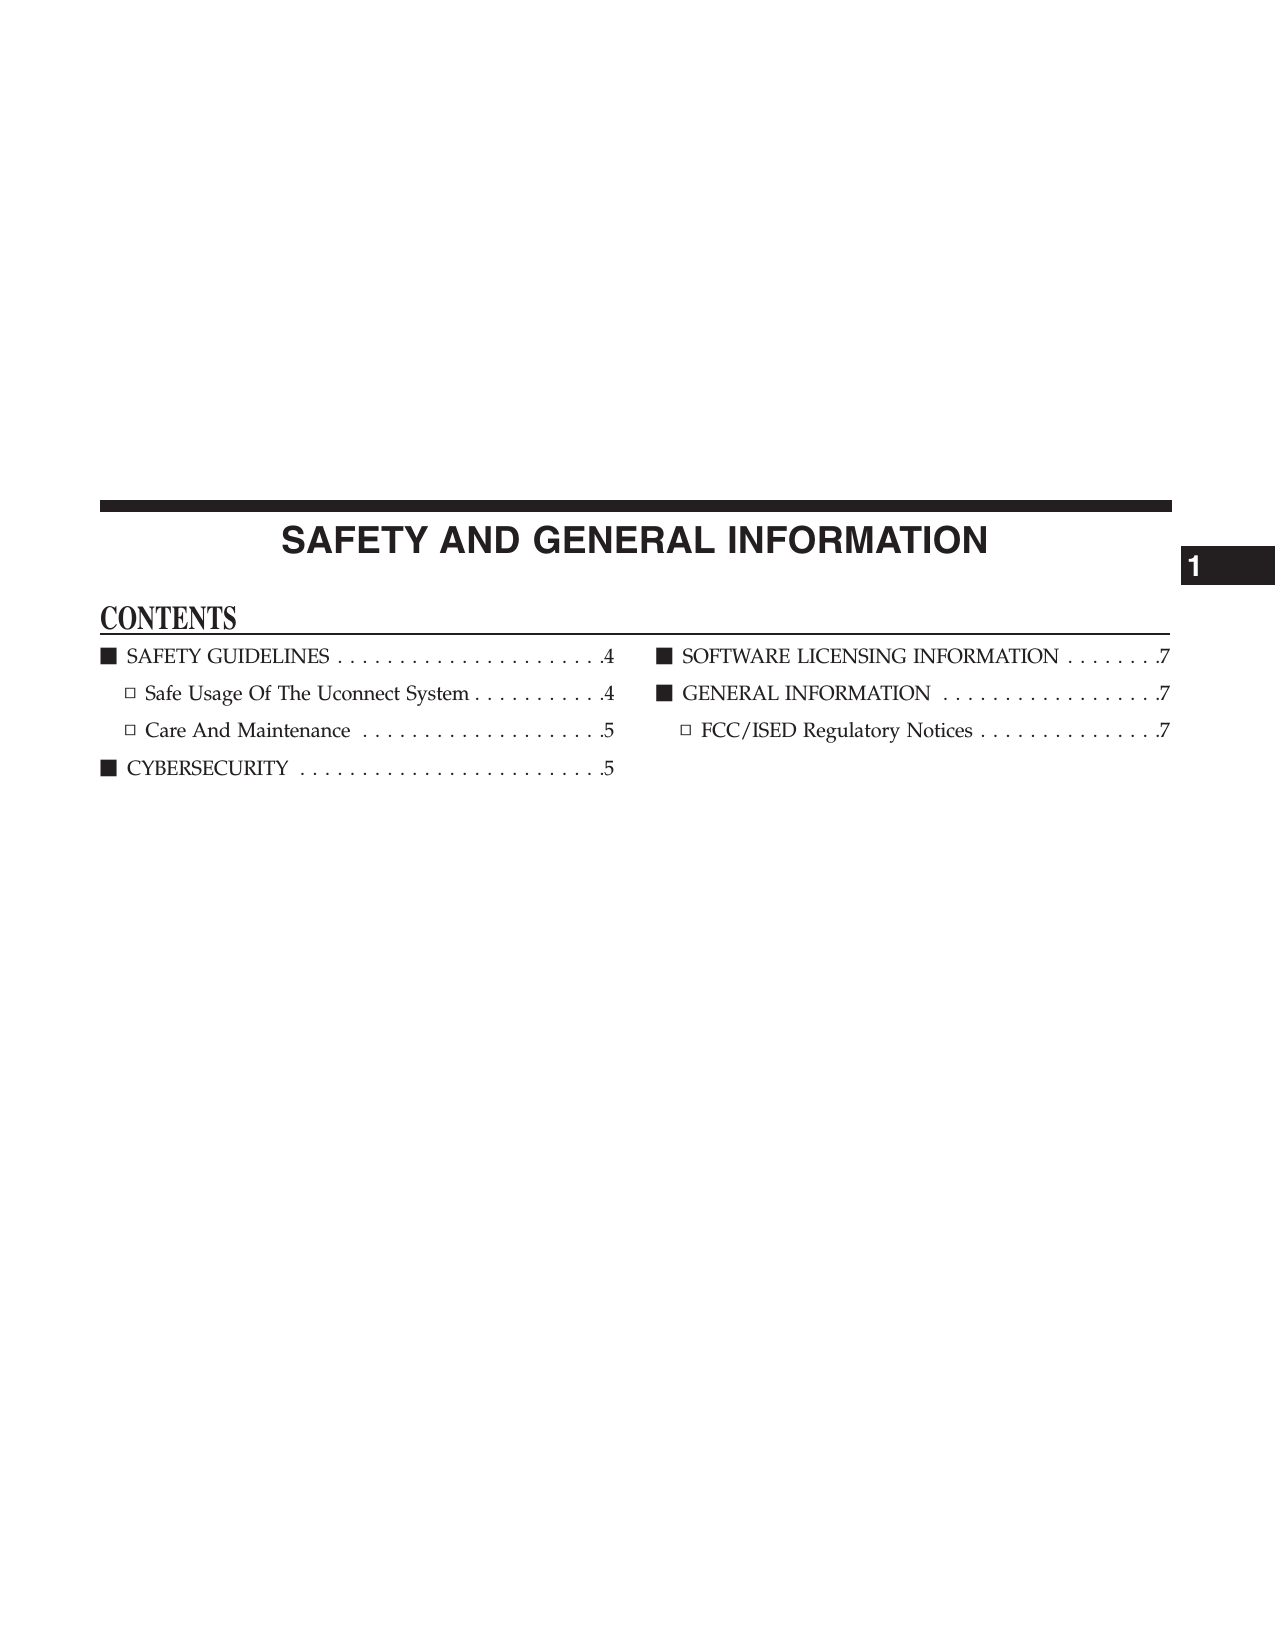 SAFETY AND GENERAL INFORMATIONCONTENTSmSAFETY GUIDELINES . . . . . . . . . . . . . . . . . . . . . .4▫Safe Usage Of The Uconnect System . . . . . . . . . . .4▫Care And Maintenance . . . . . . . . . . . . . . . . . . . .5mCYBERSECURITY . . . . . . . . . . . . . . . . . . . . . . . . .5mSOFTWARE LICENSING INFORMATION . . . . . . . .7mGENERAL INFORMATION . . . . . . . . . . . . . . . . . .7▫FCC/ISED Regulatory Notices . . . . . . . . . . . . . . .71